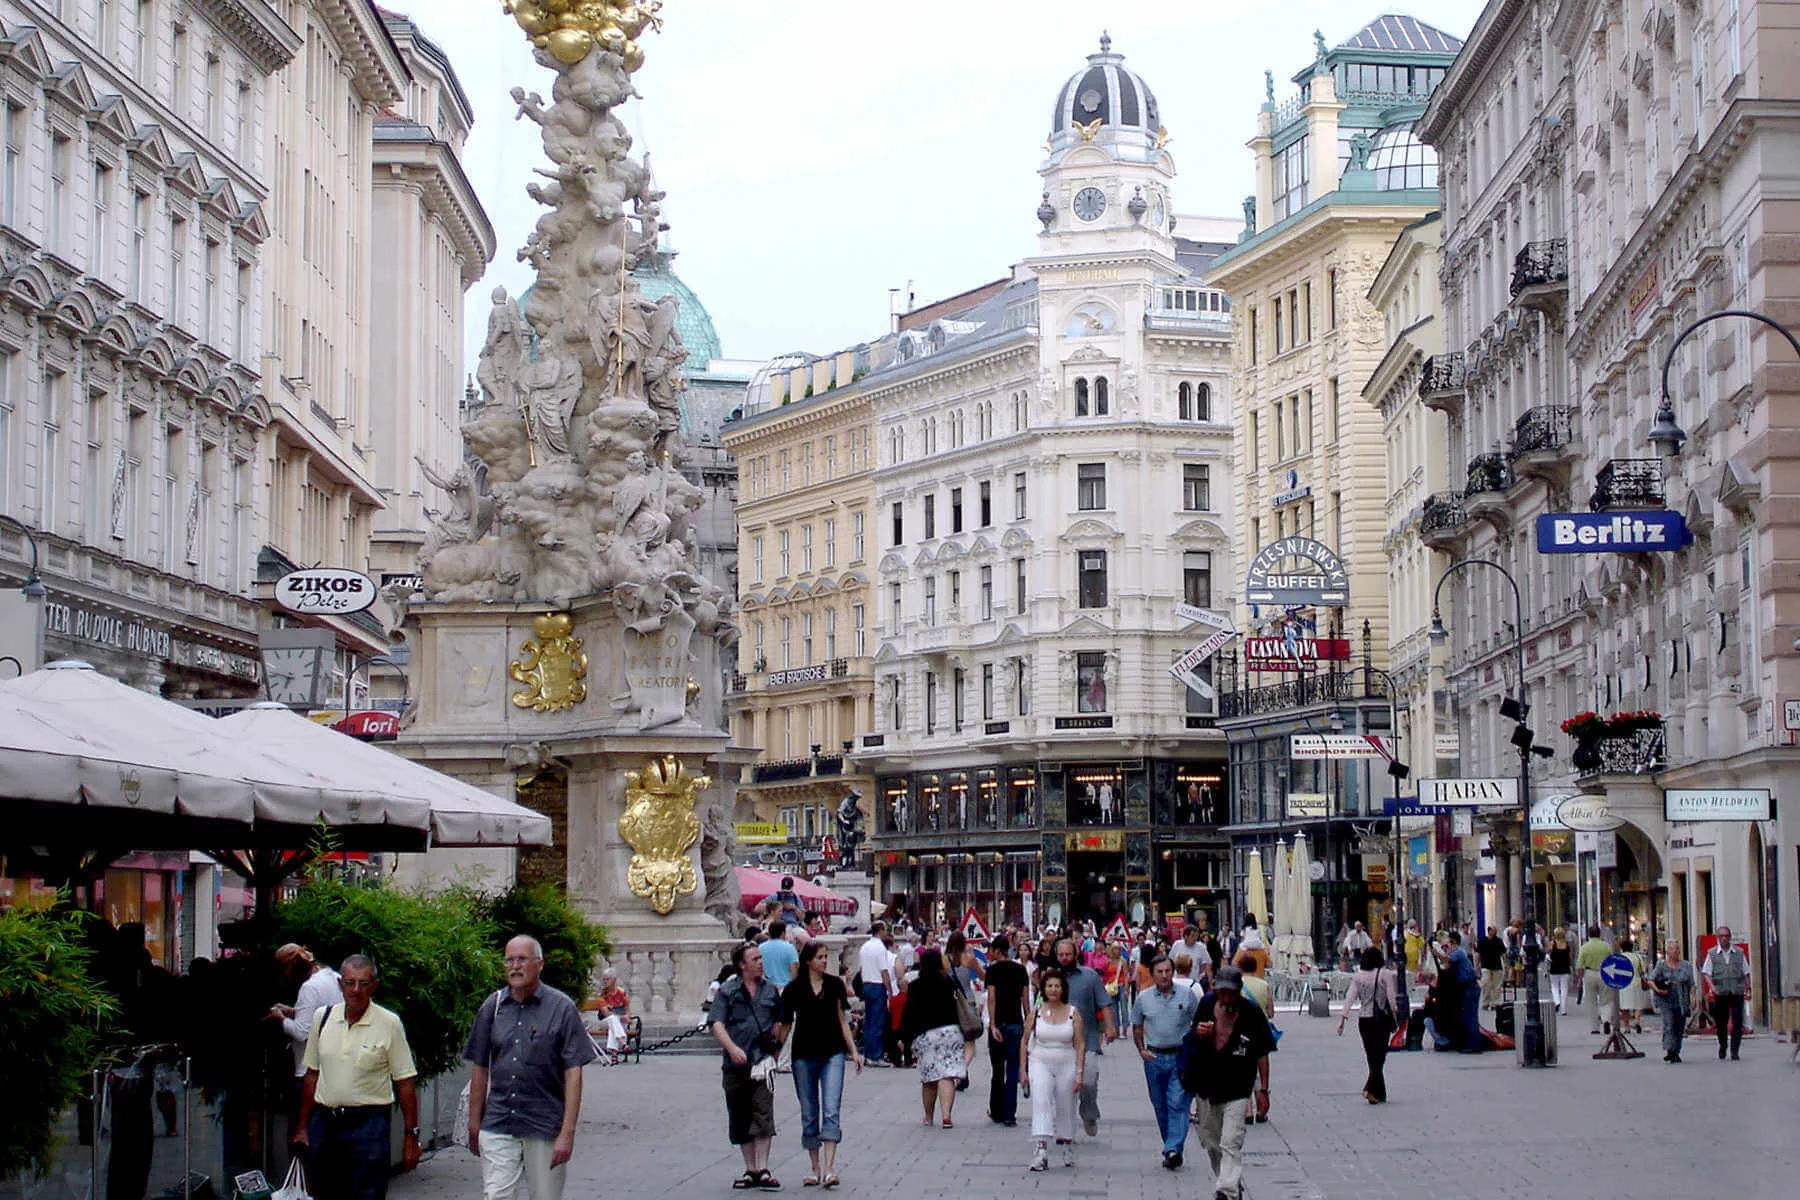 With elegant storefronts and lively people-watching, strolling the streets of Vienna is a delight